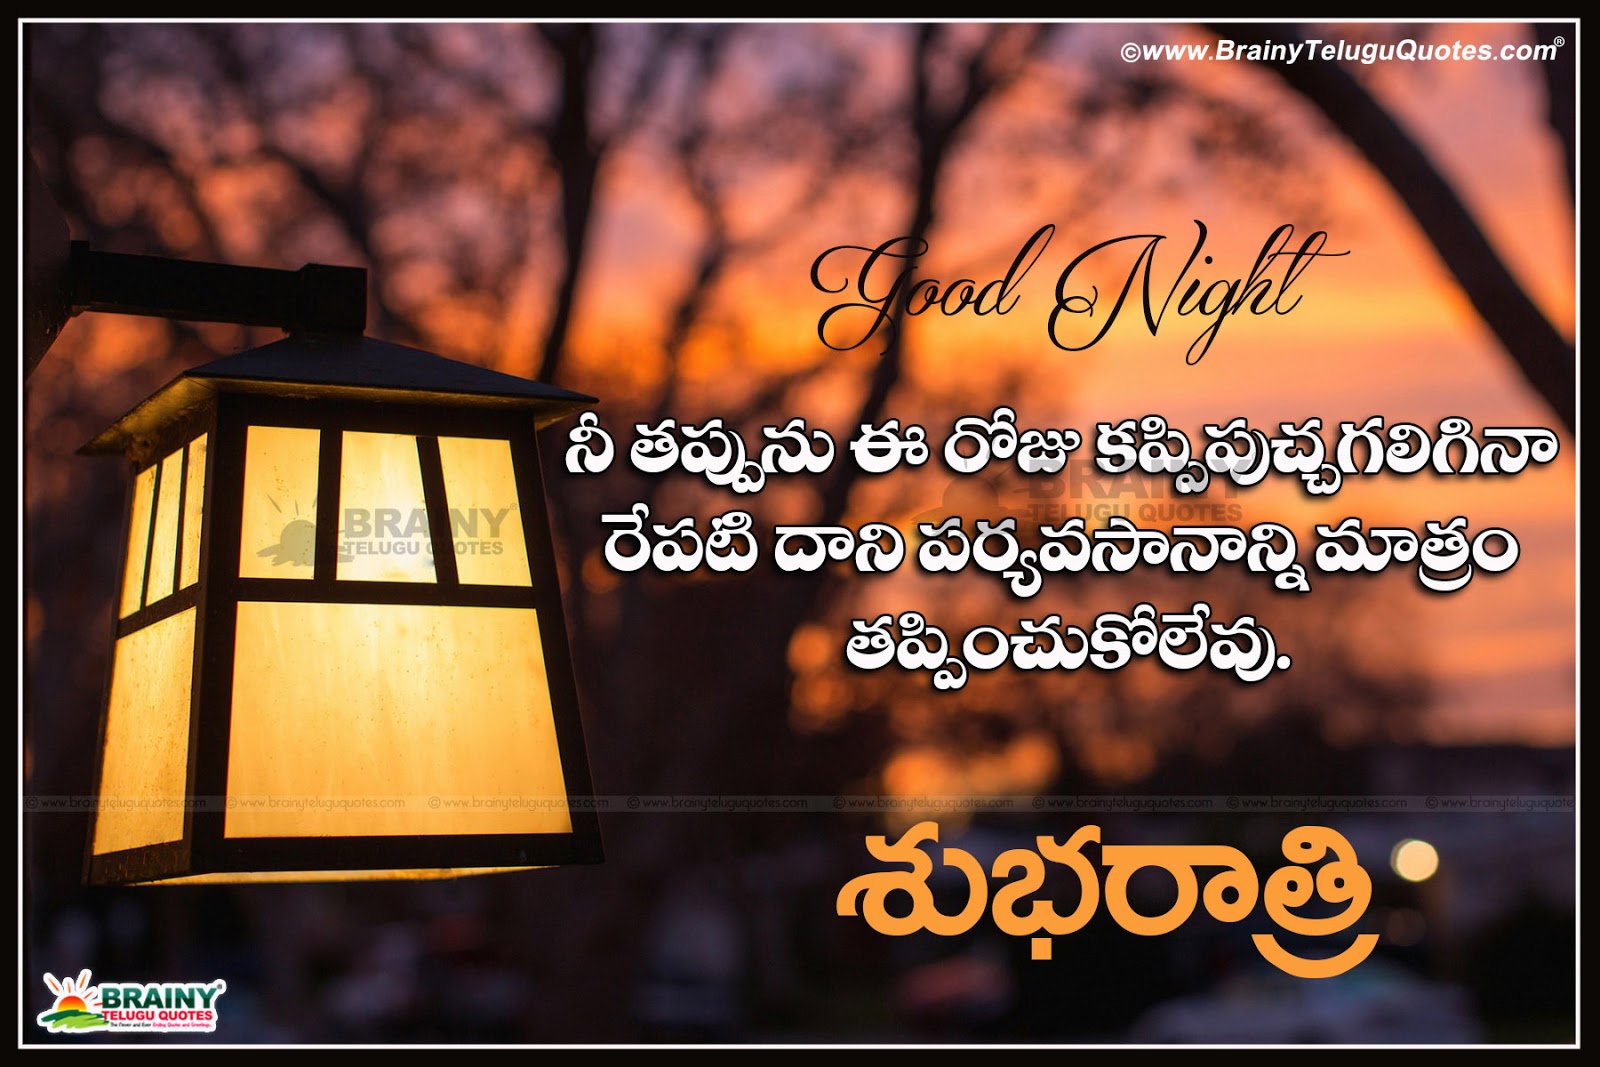 Best Telugu Good night quotations with nice wallpapers 